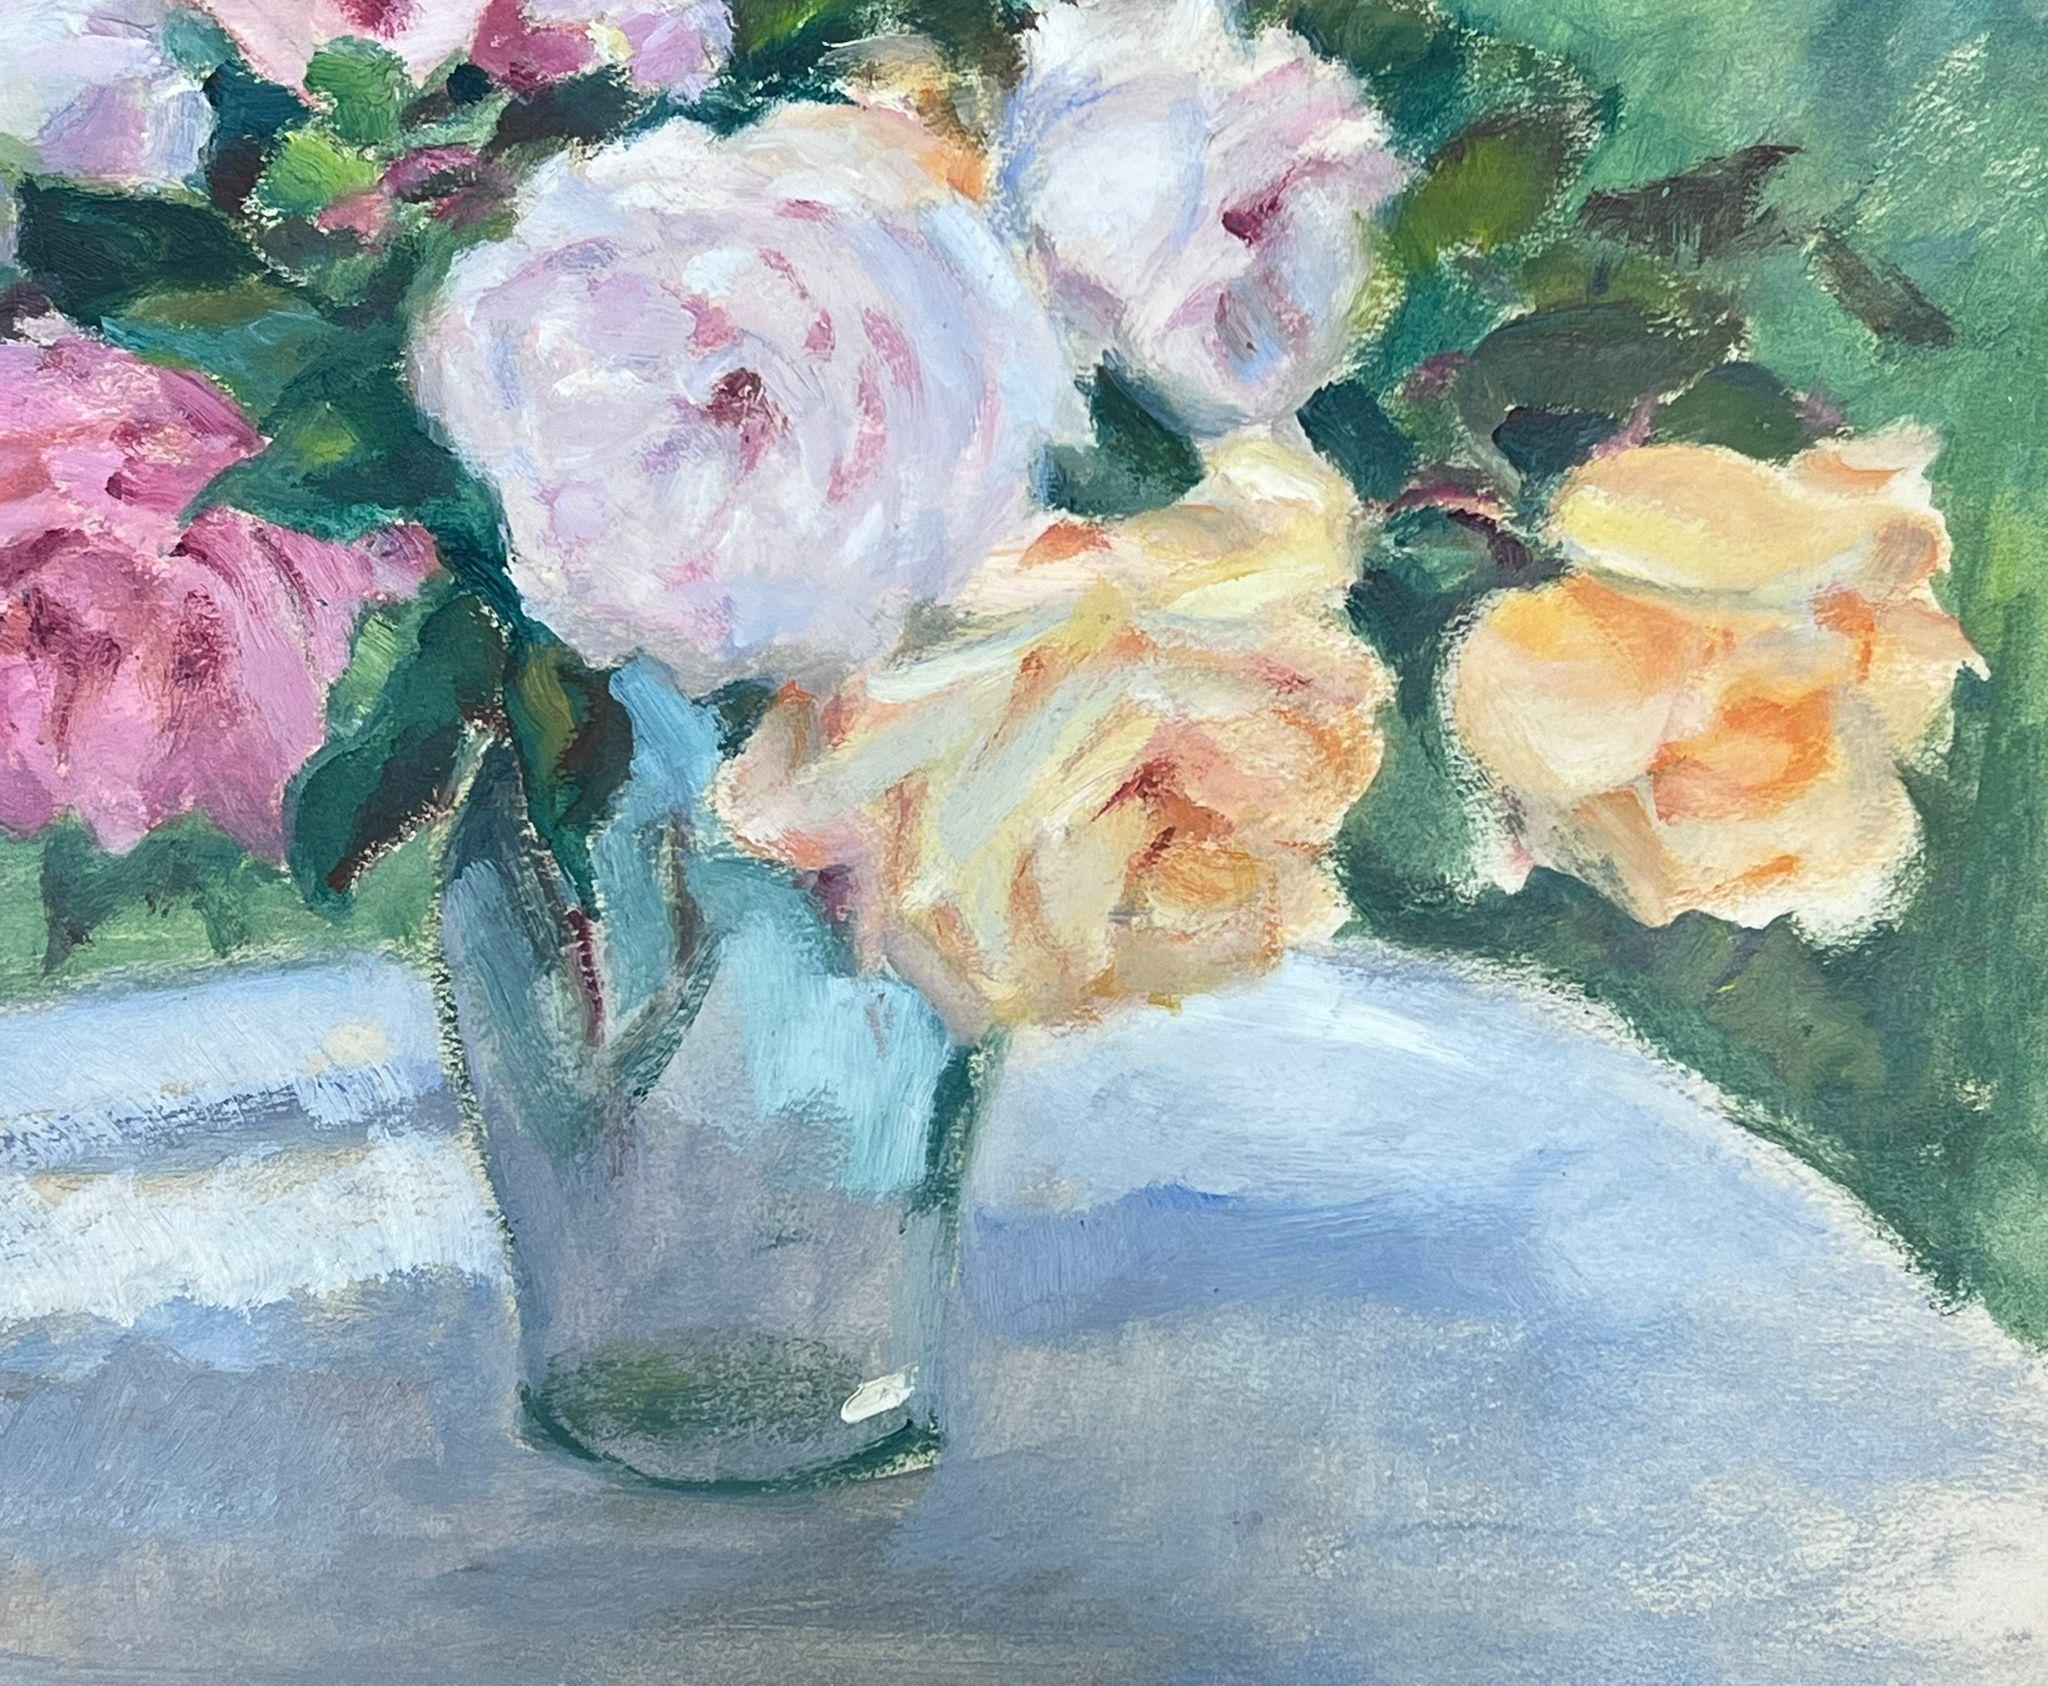 Roses
by Louise Alix (French, 1888-1980) *see notes below
provenance stamp to the back 
gouache painting on artist paper, unframed
measures: 13 high by 16.5 inches wide
condition: overall very good and sound, a few scuffs and marks to the surface